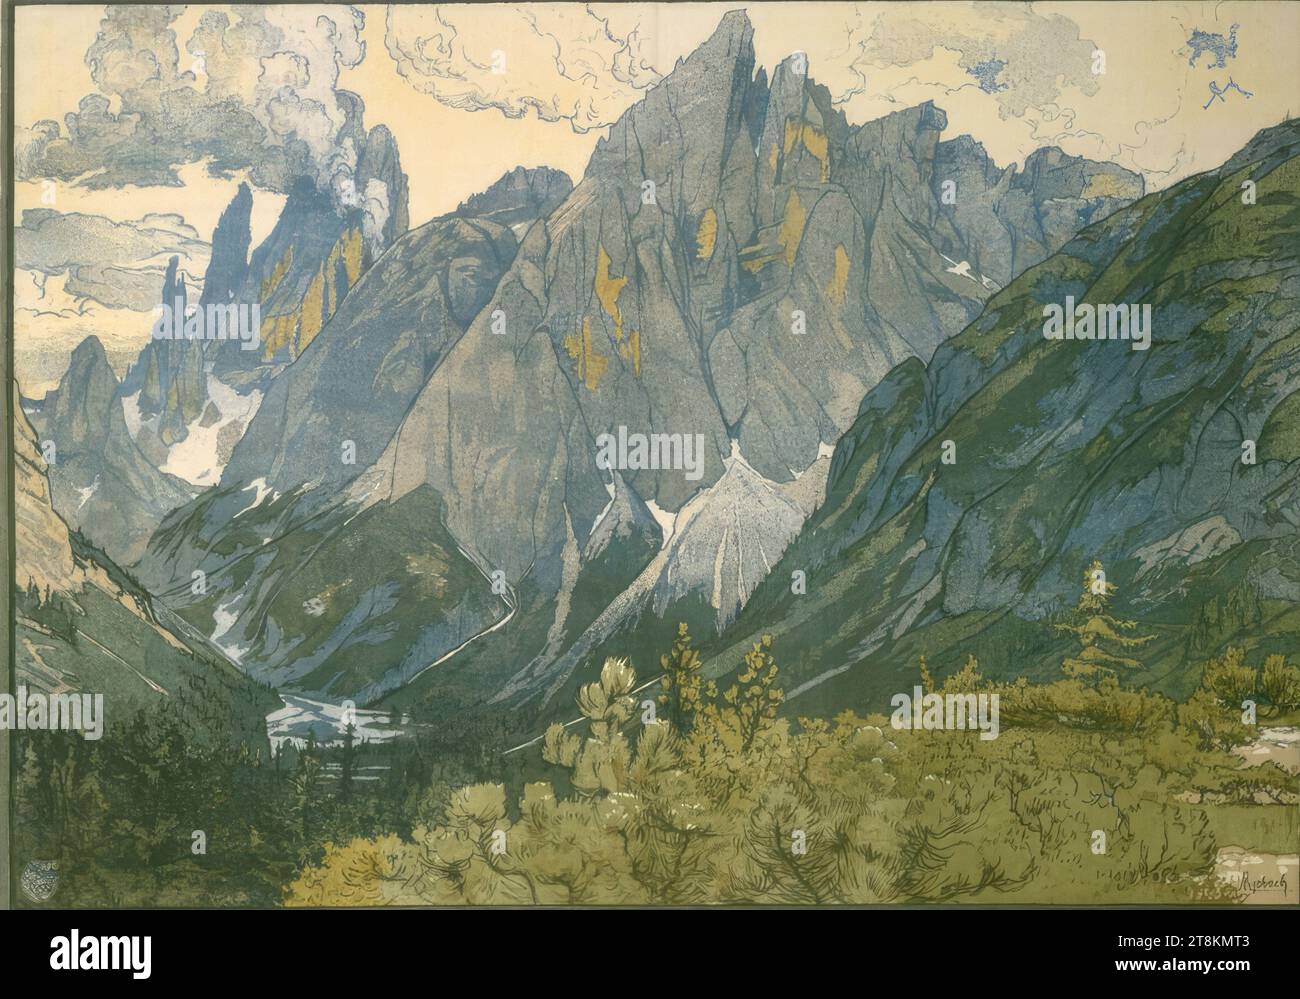 FROM THE DOLOMITES, SEXTENTHAL, Felician von Myrbach-Rheinfeld, Zaleszczyki, Galicia, 1853 - 1940 Klagenfurt, around 1910, print, color lithograph, sheet: 750 mm x 1050 mm, l.l. 'R. V. / 1847', in the coat of arms; in print Stock Photo